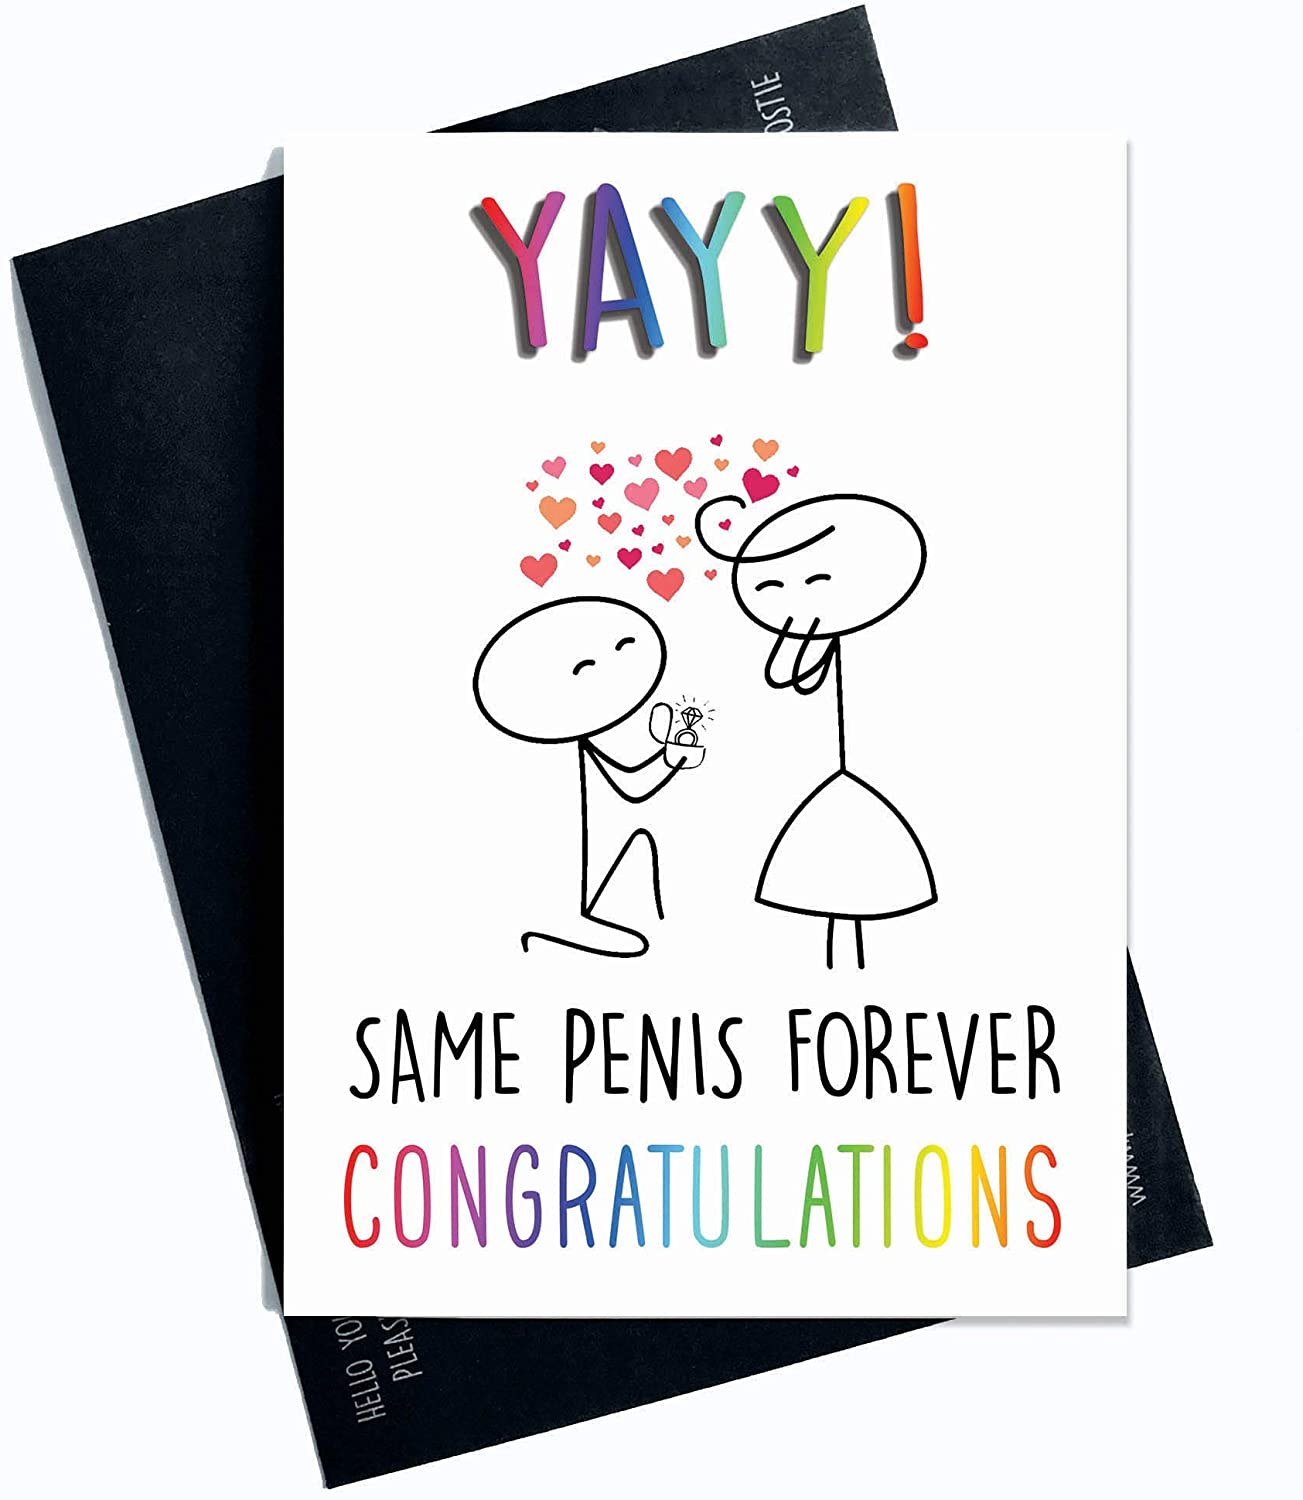 Peachy Antics ''Yayy! Same Penis Forever Congratulations'' Engagement Card RRP 2.88 CLEARANCE XL 1.99